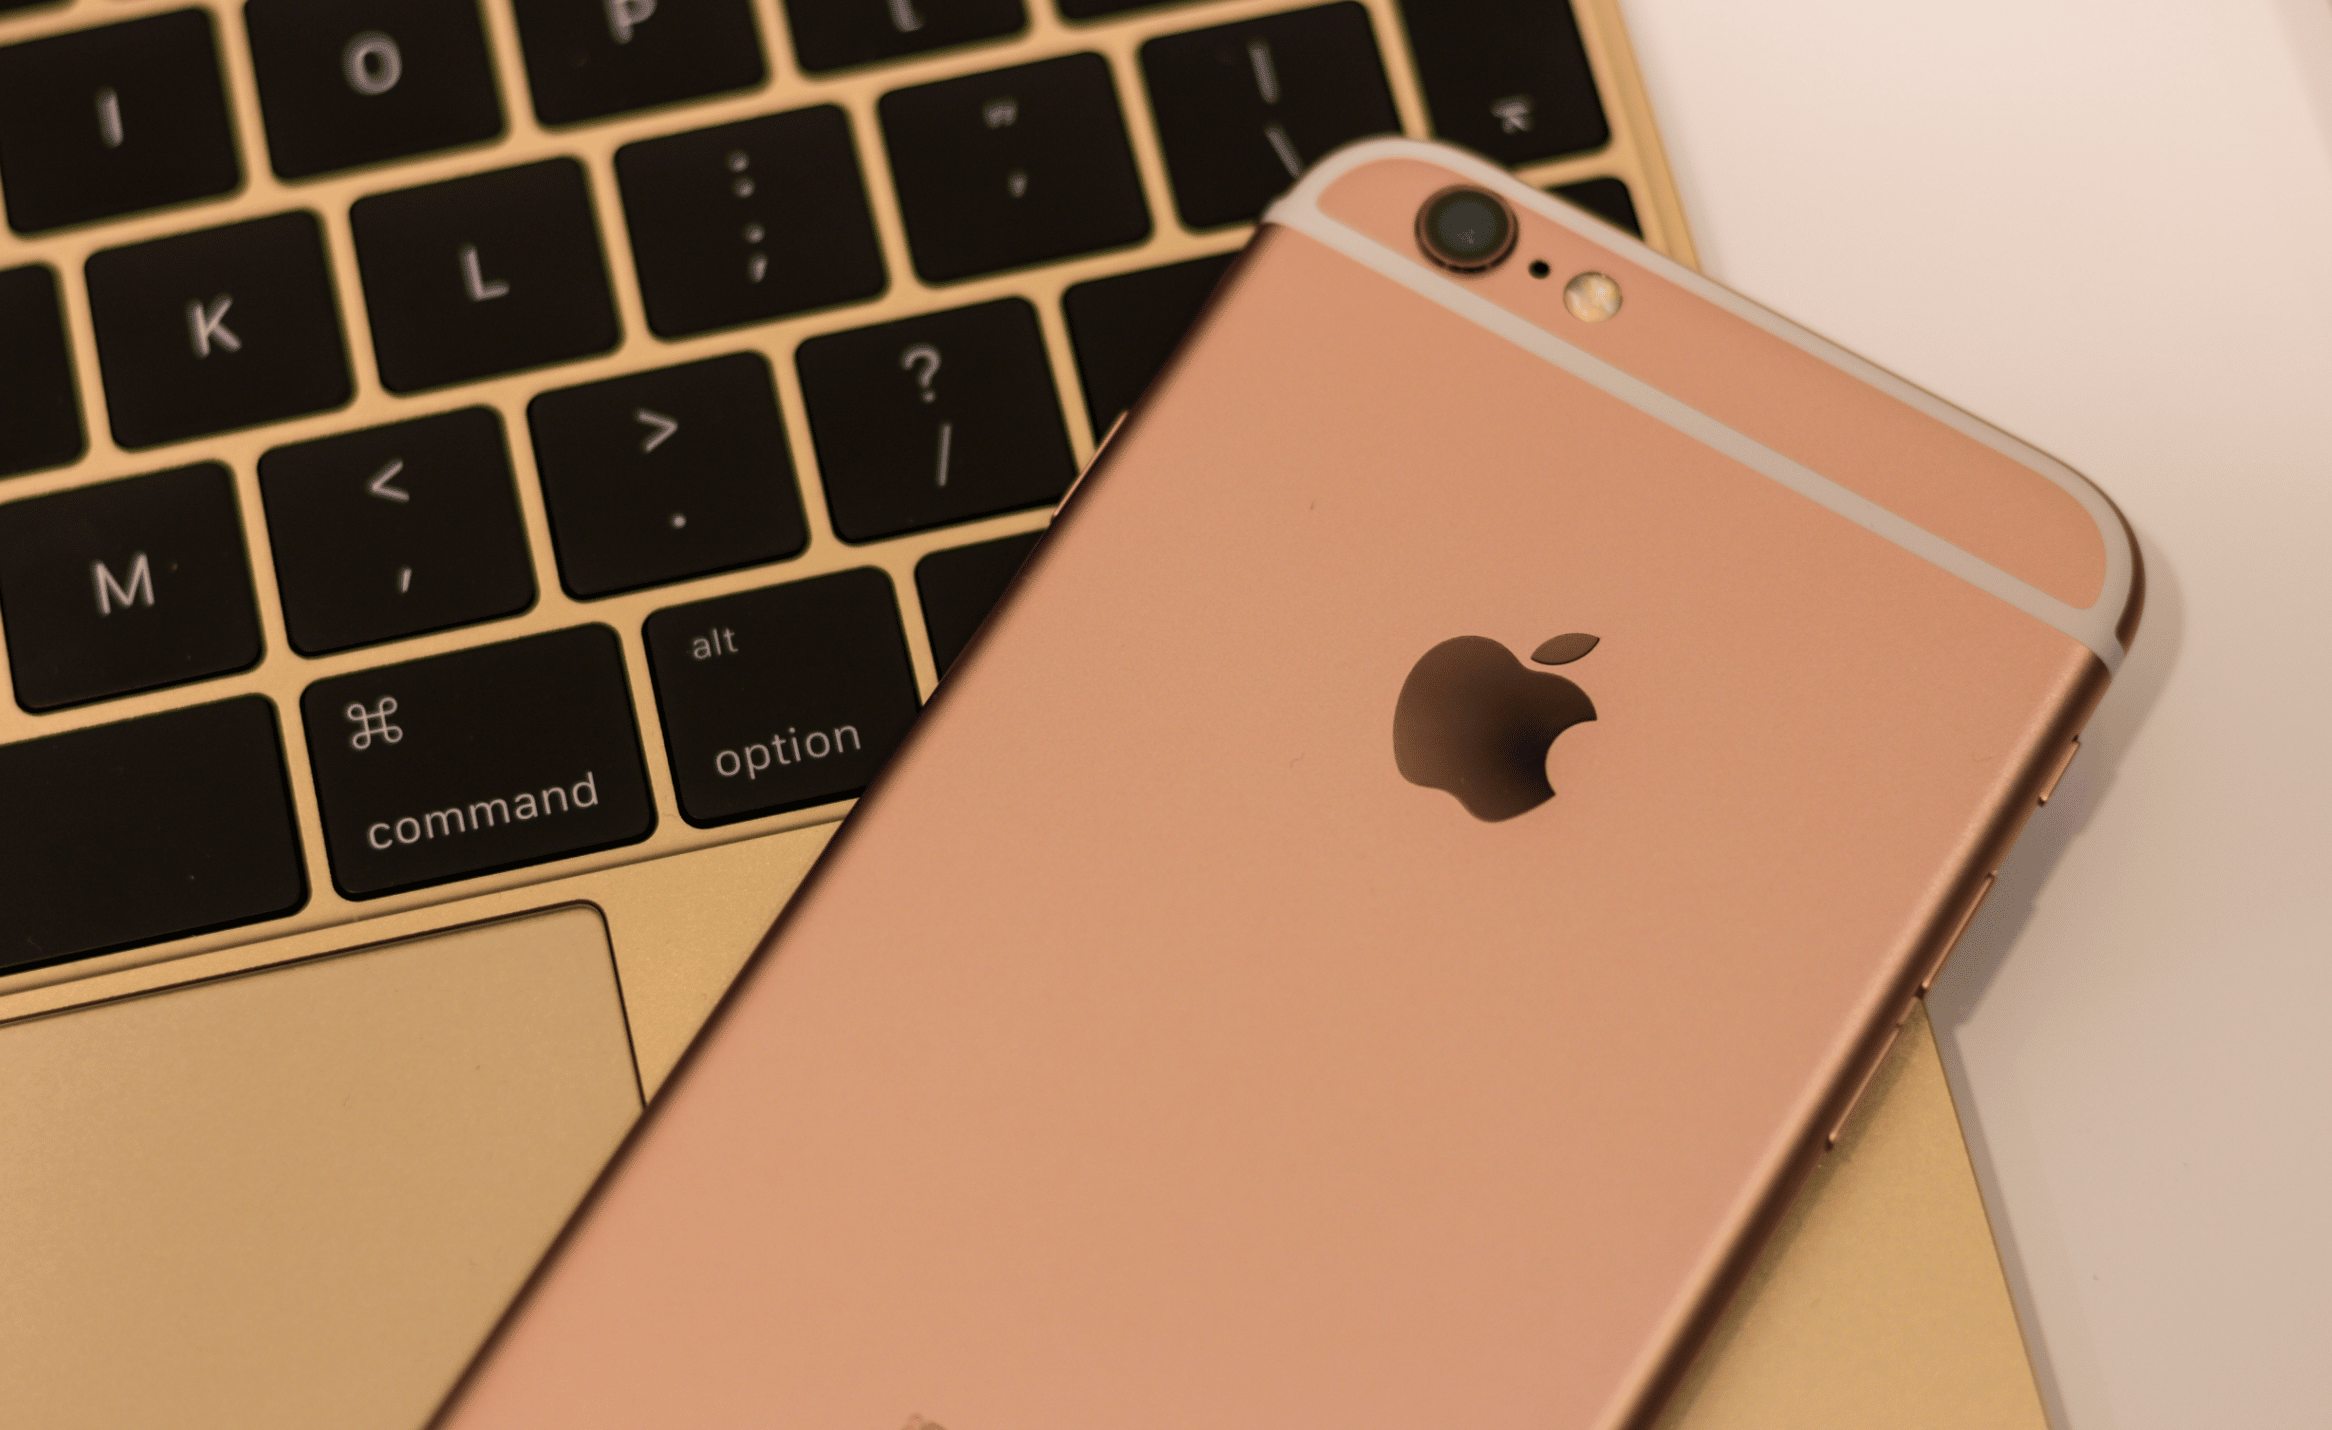 What You Need to Know About Replacing Your iPhone Battery